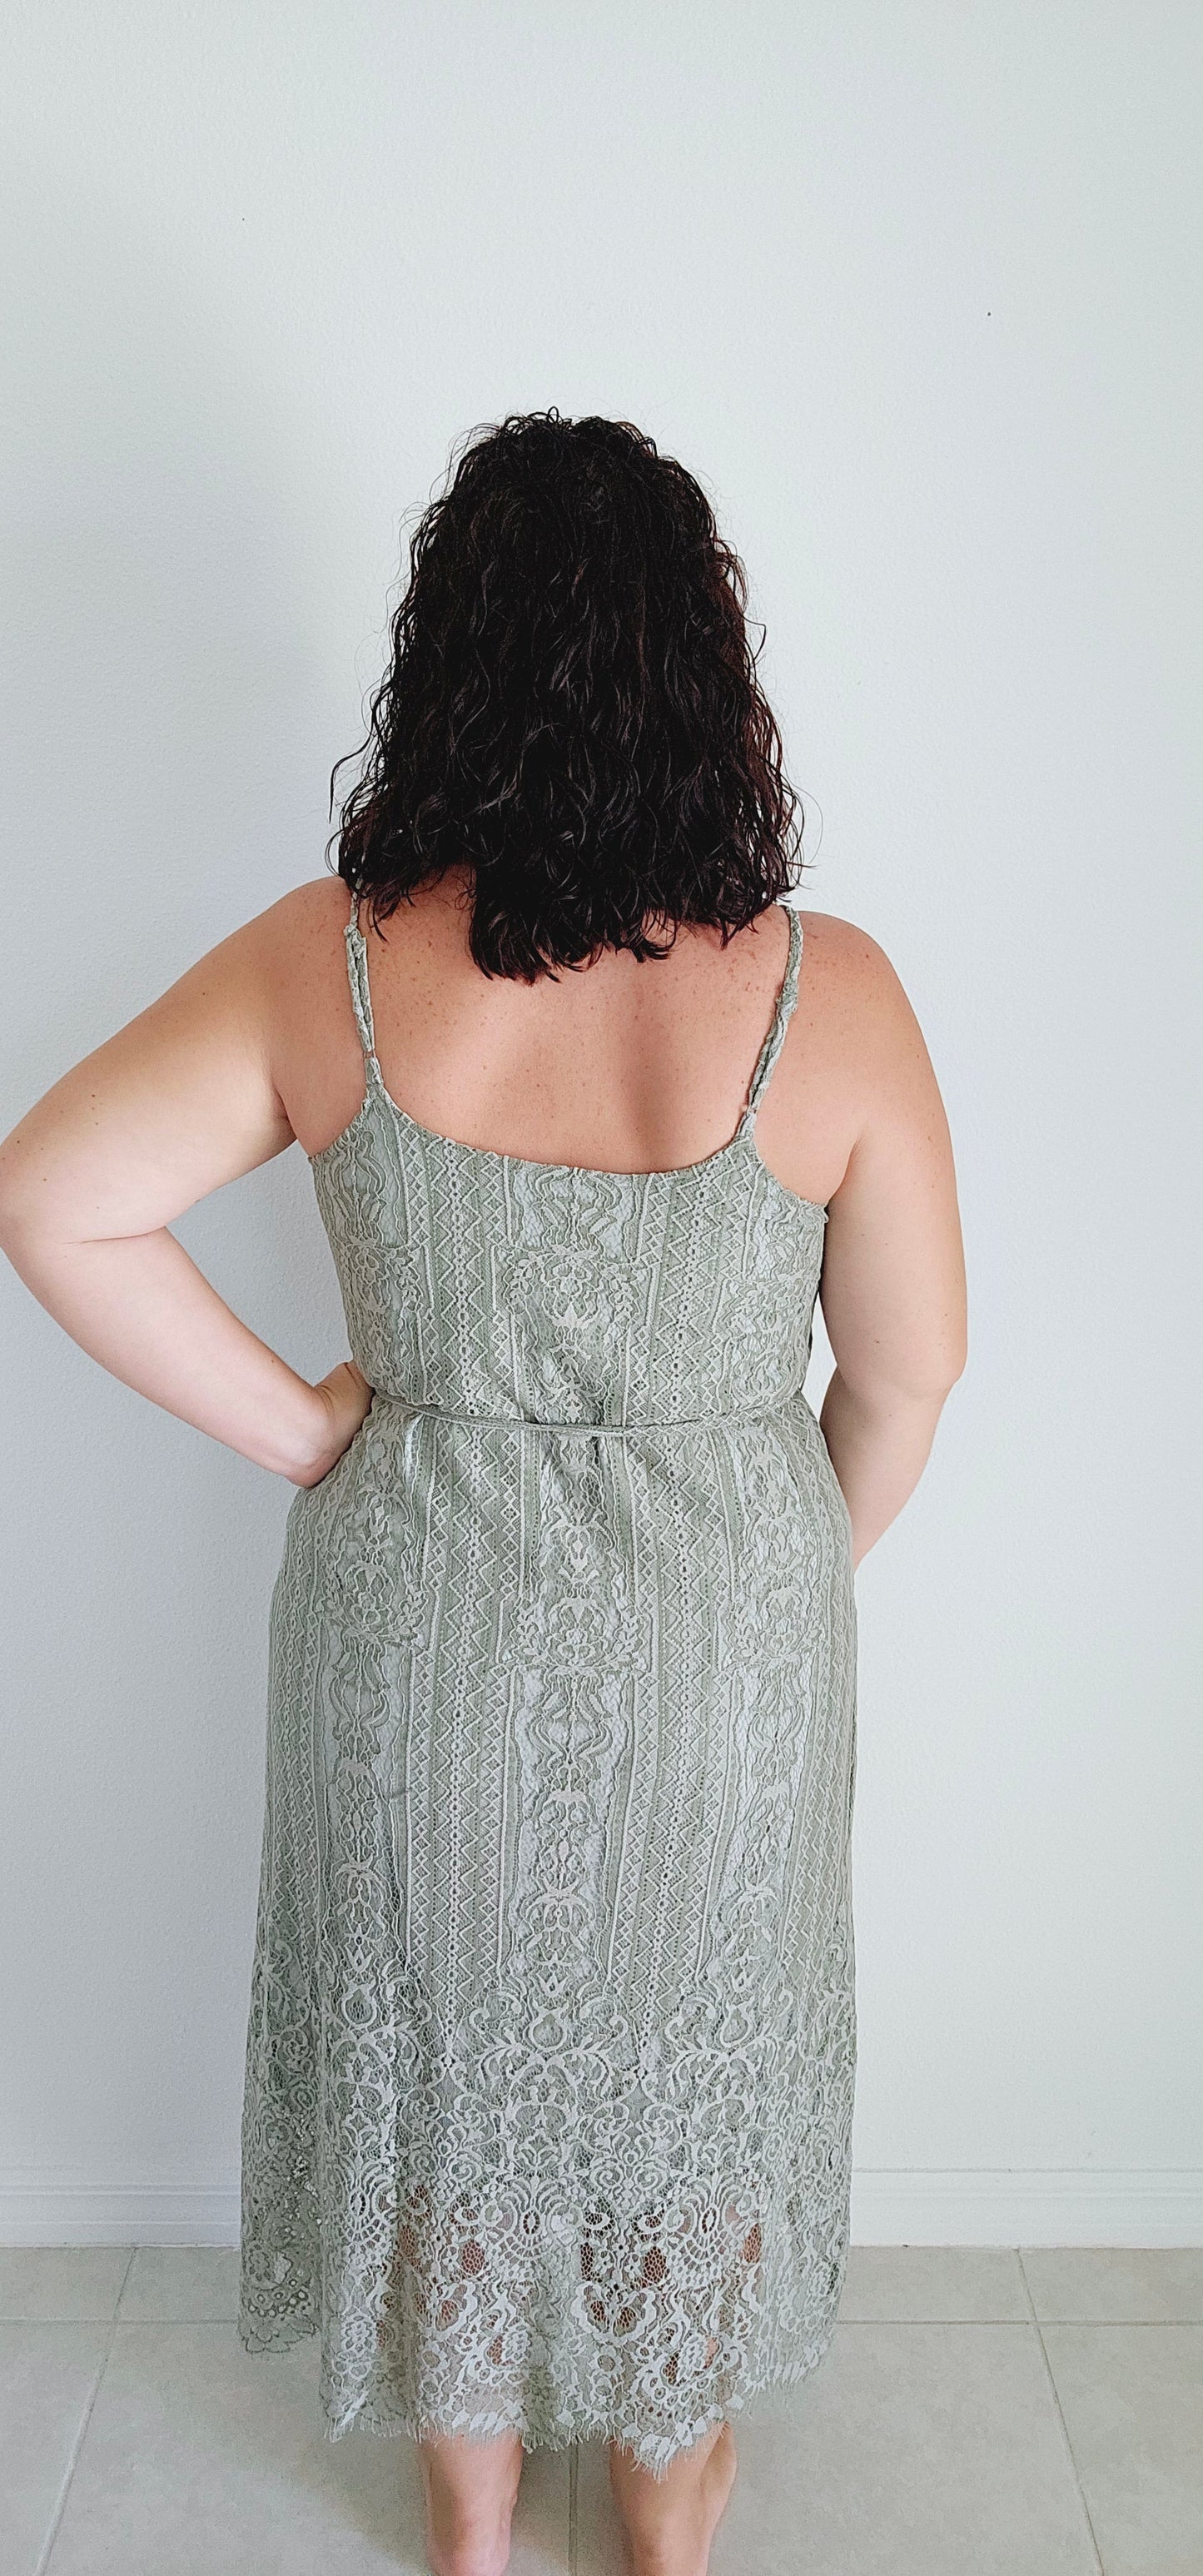 This A-line slip dress features a delicate lace overlay and a flattering waist tie, perfect for accentuating your figure. With adjustable shoulder straps and a soft rayon lining, this dress is both stylish and comfortable. Wear it to your next event for a touch of elegance with a modern twist. Sizes small through large.